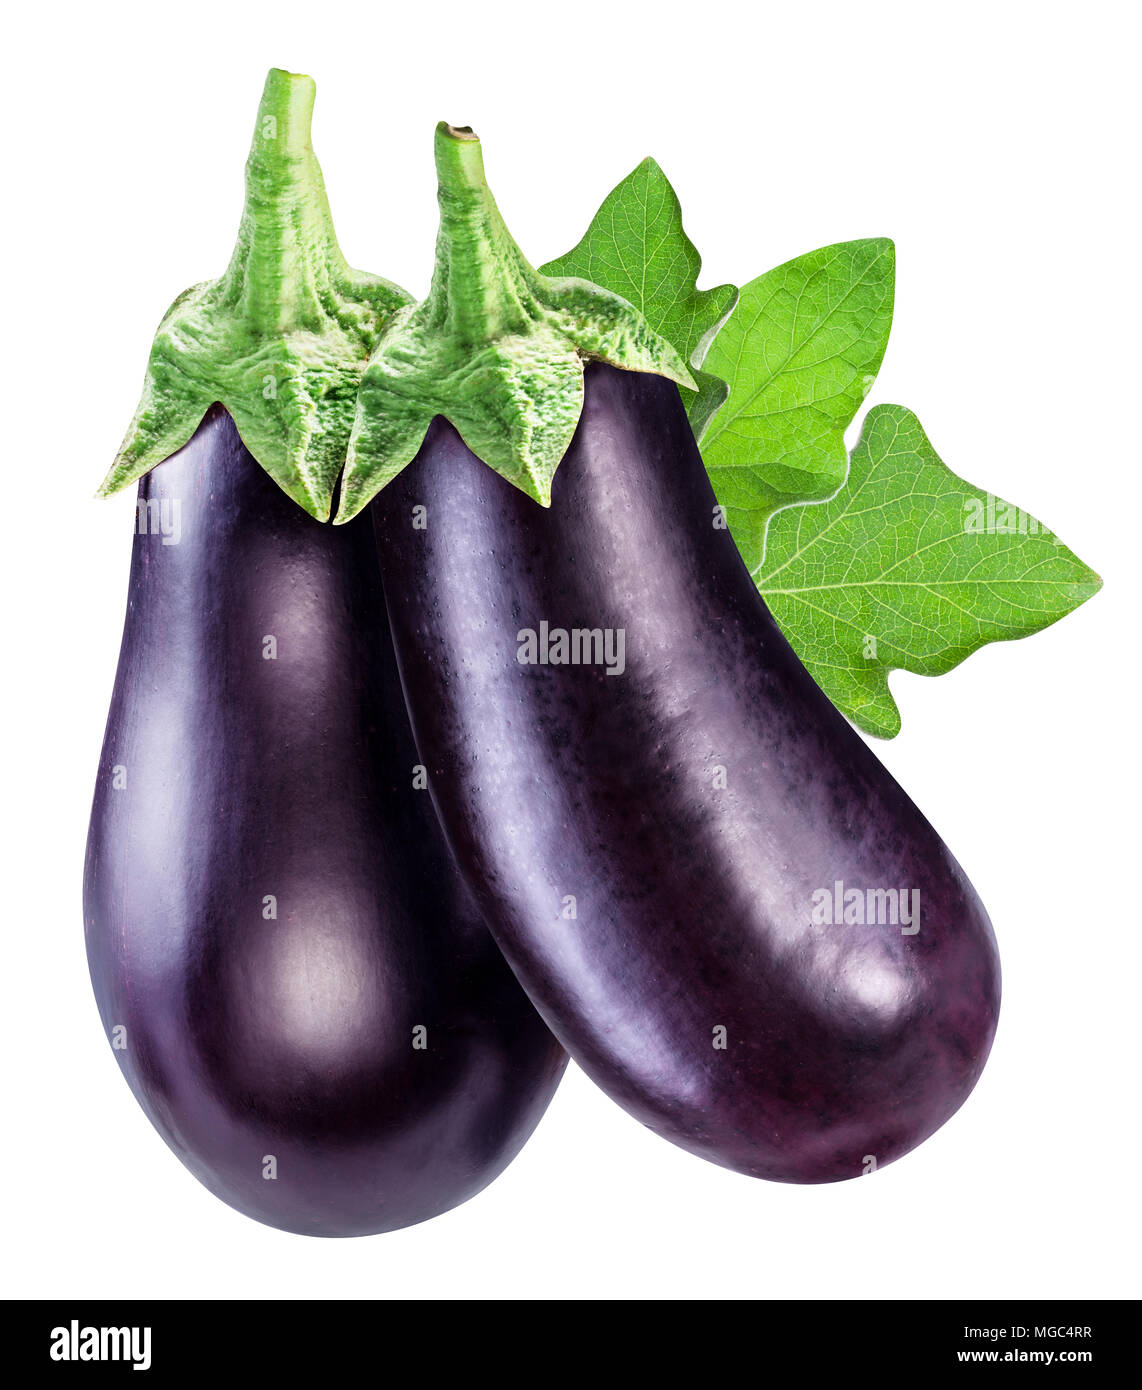 Aubergines or eggplants with eggplant leaf white background. File contains clipping path. Stock Photo